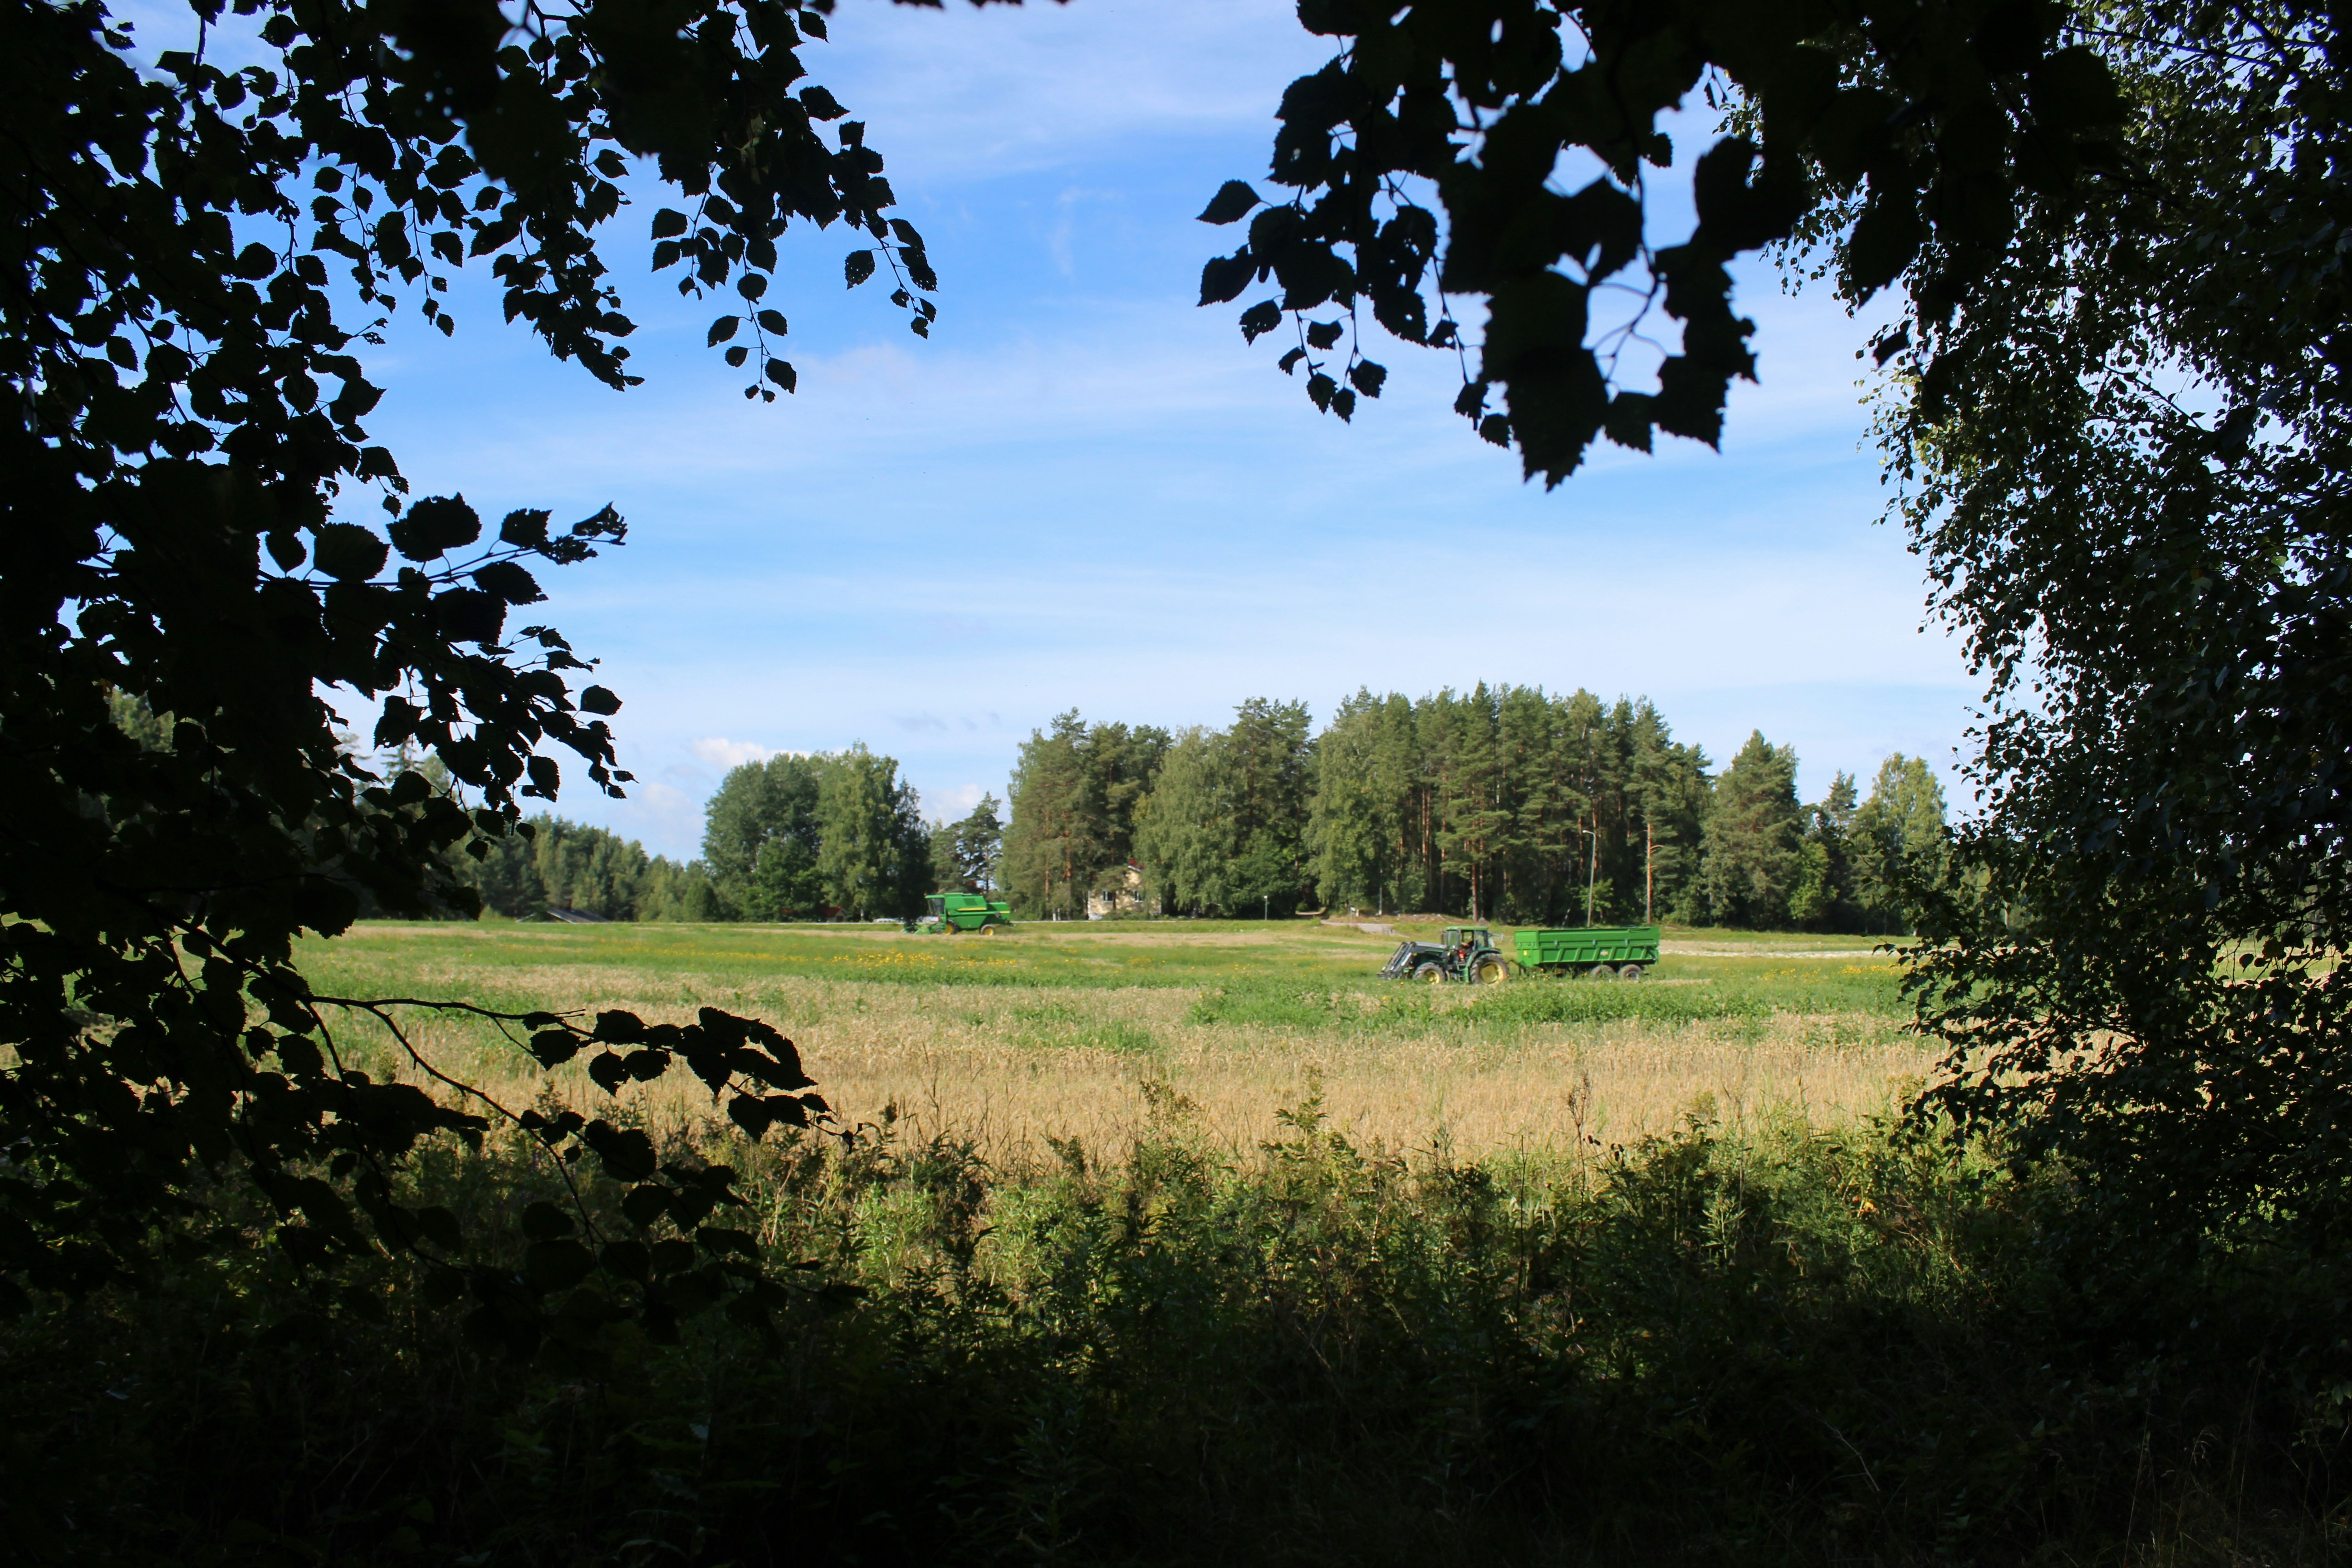 green grass field and trees under blue sky during daytime